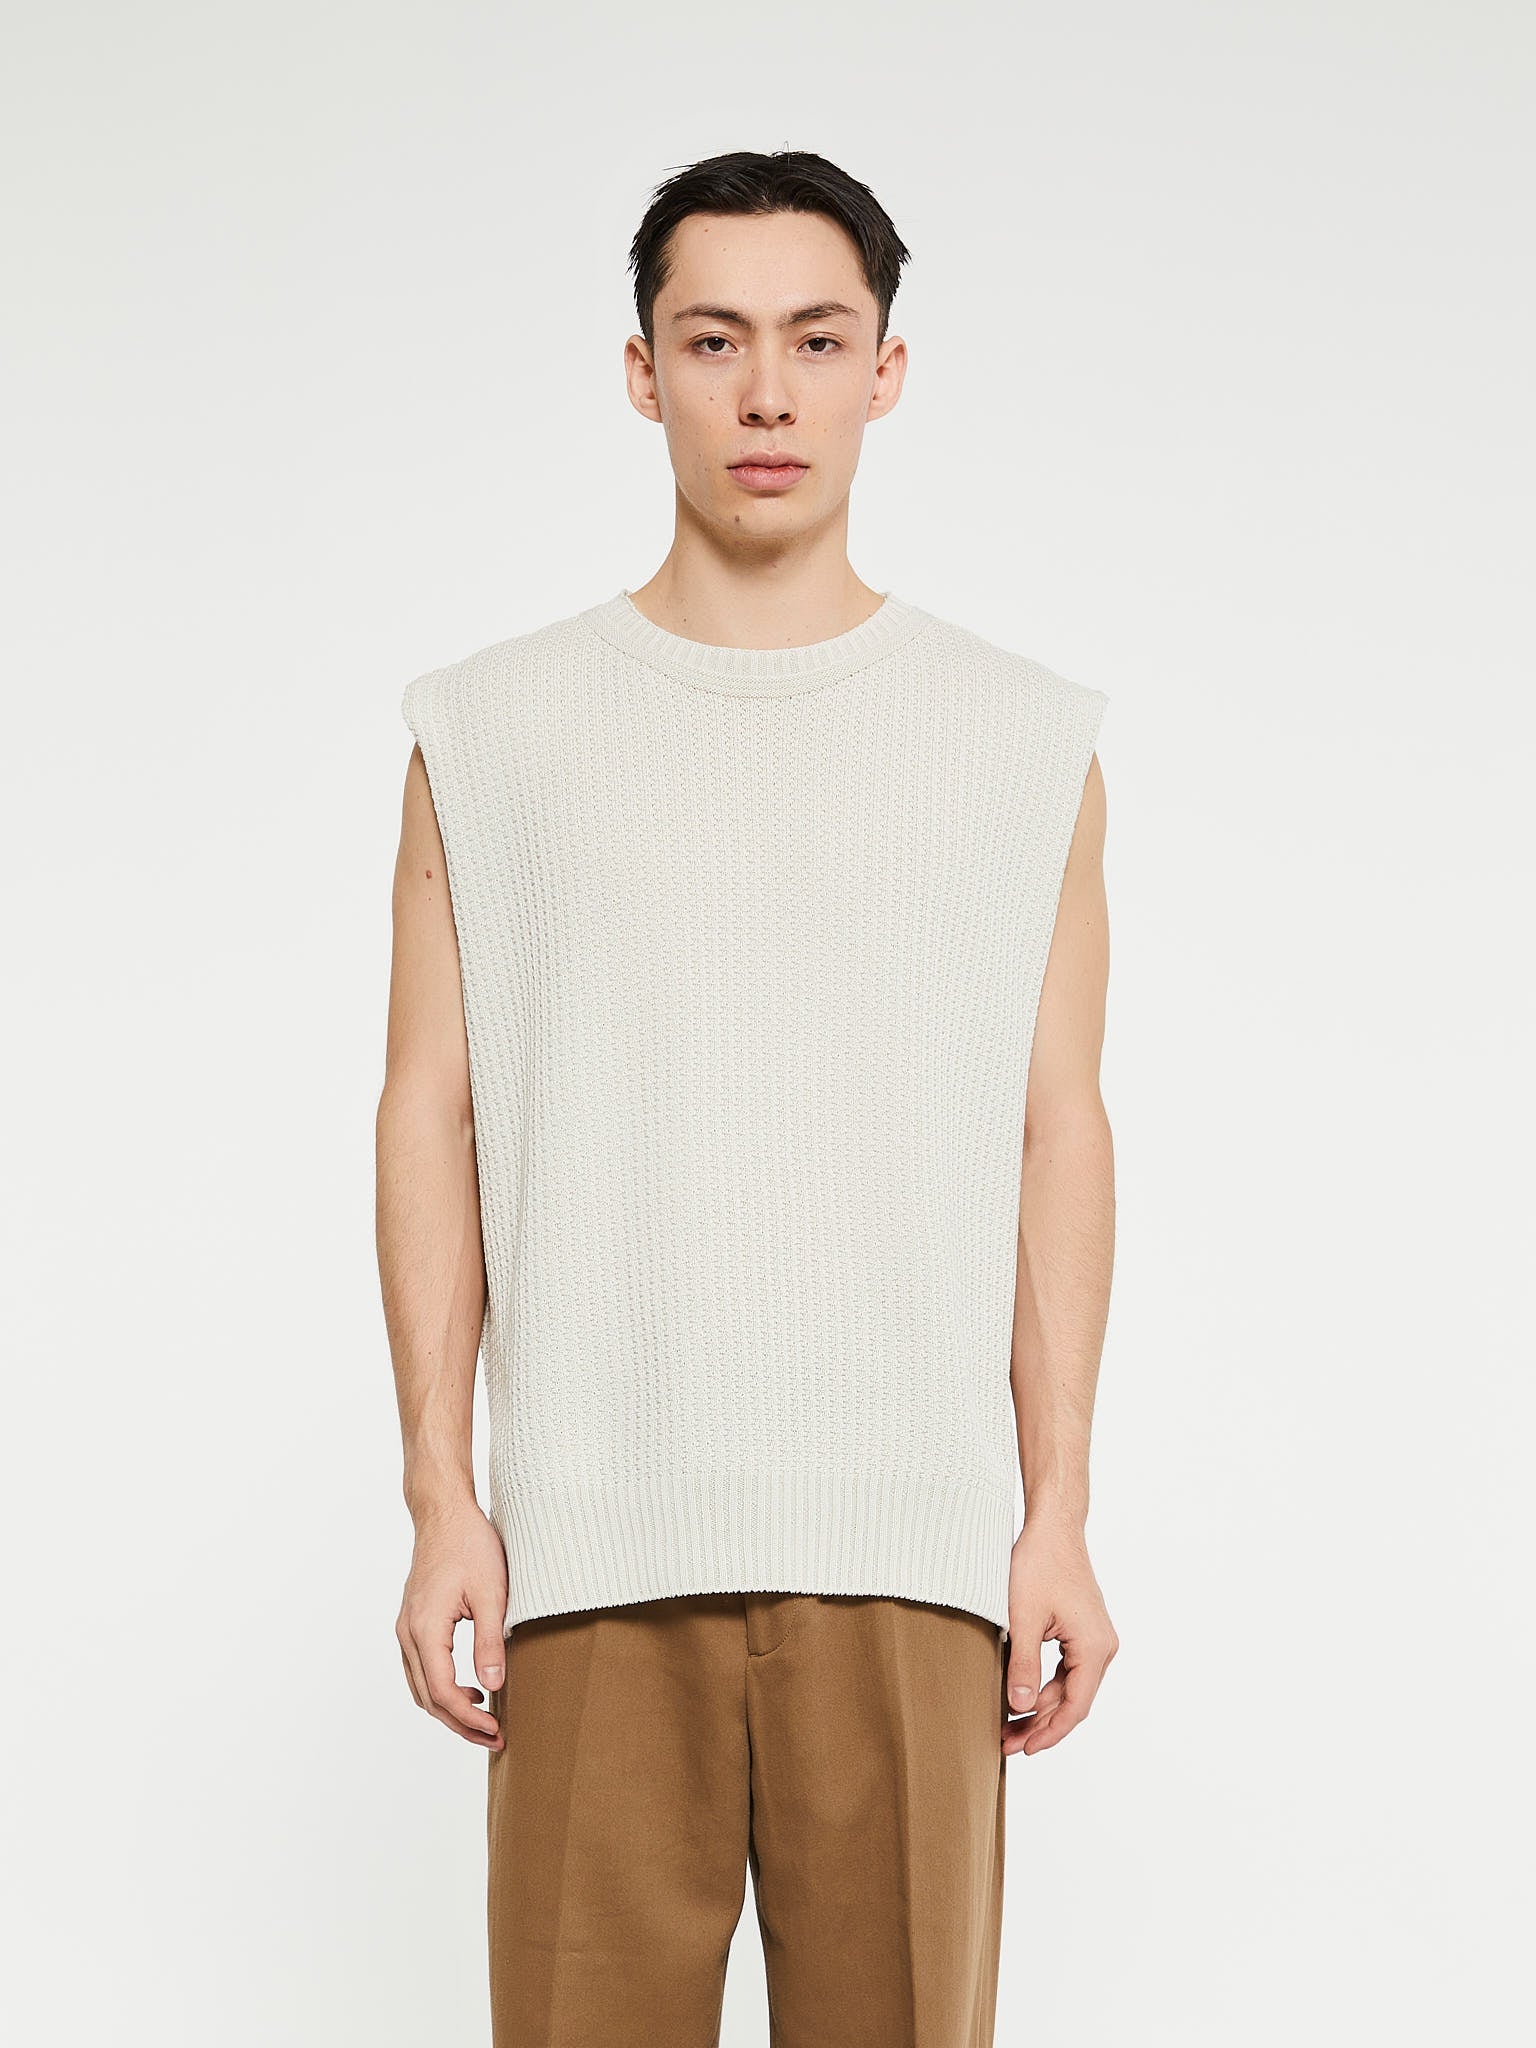 Knitwear for Men | See knitwear for men at stoy